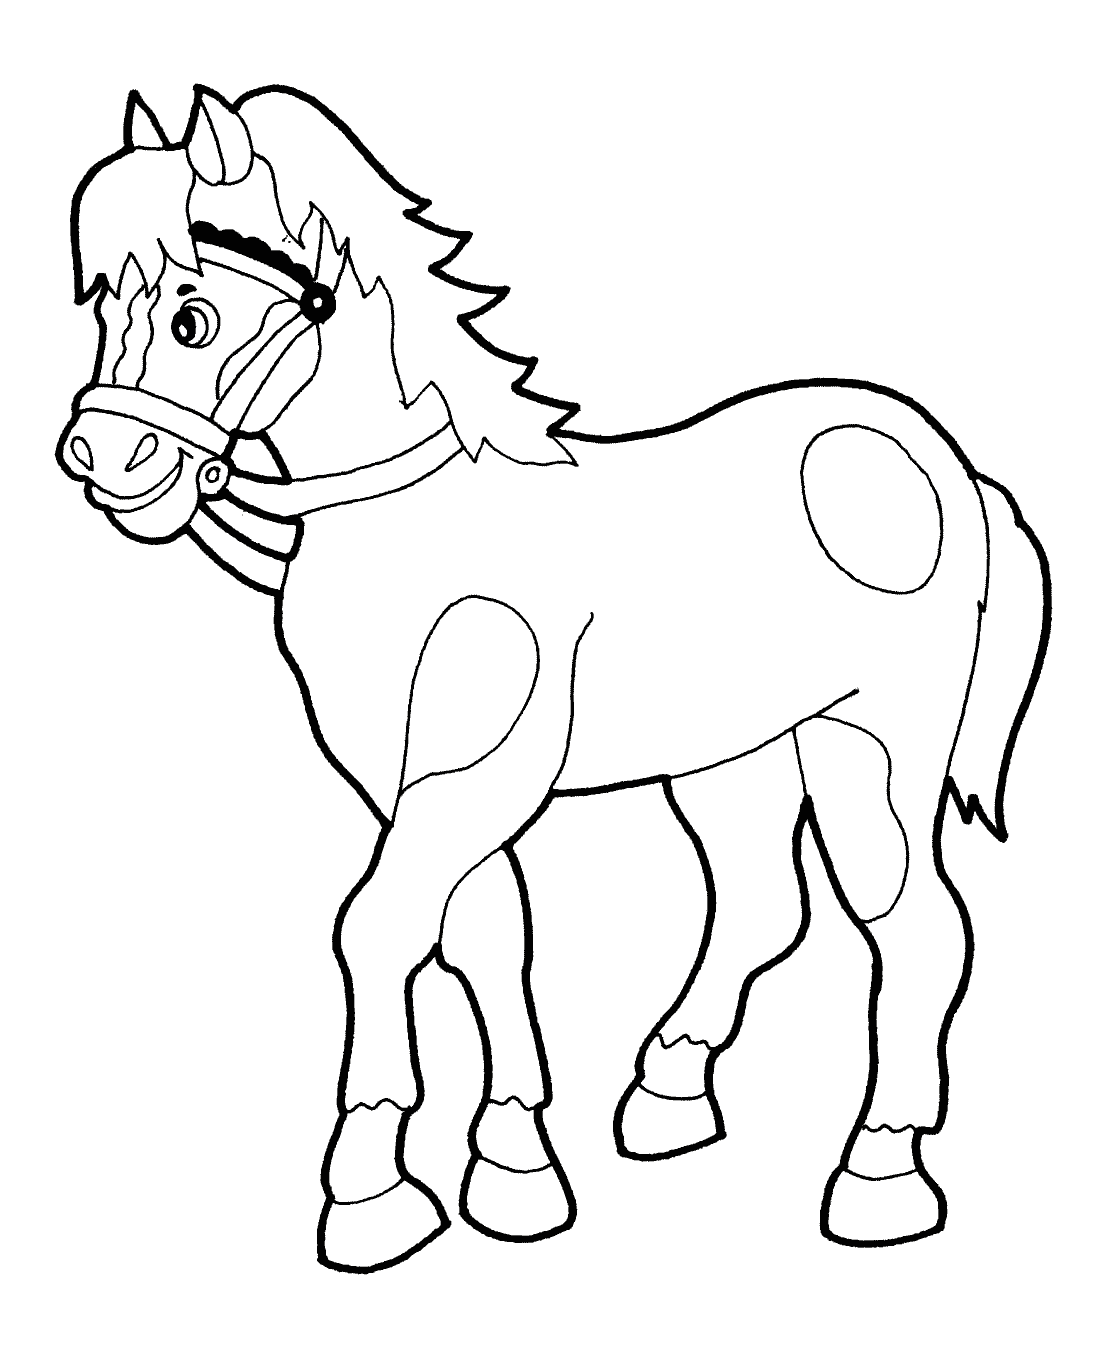 Horse | Coloring book for children: 59 coloring pages